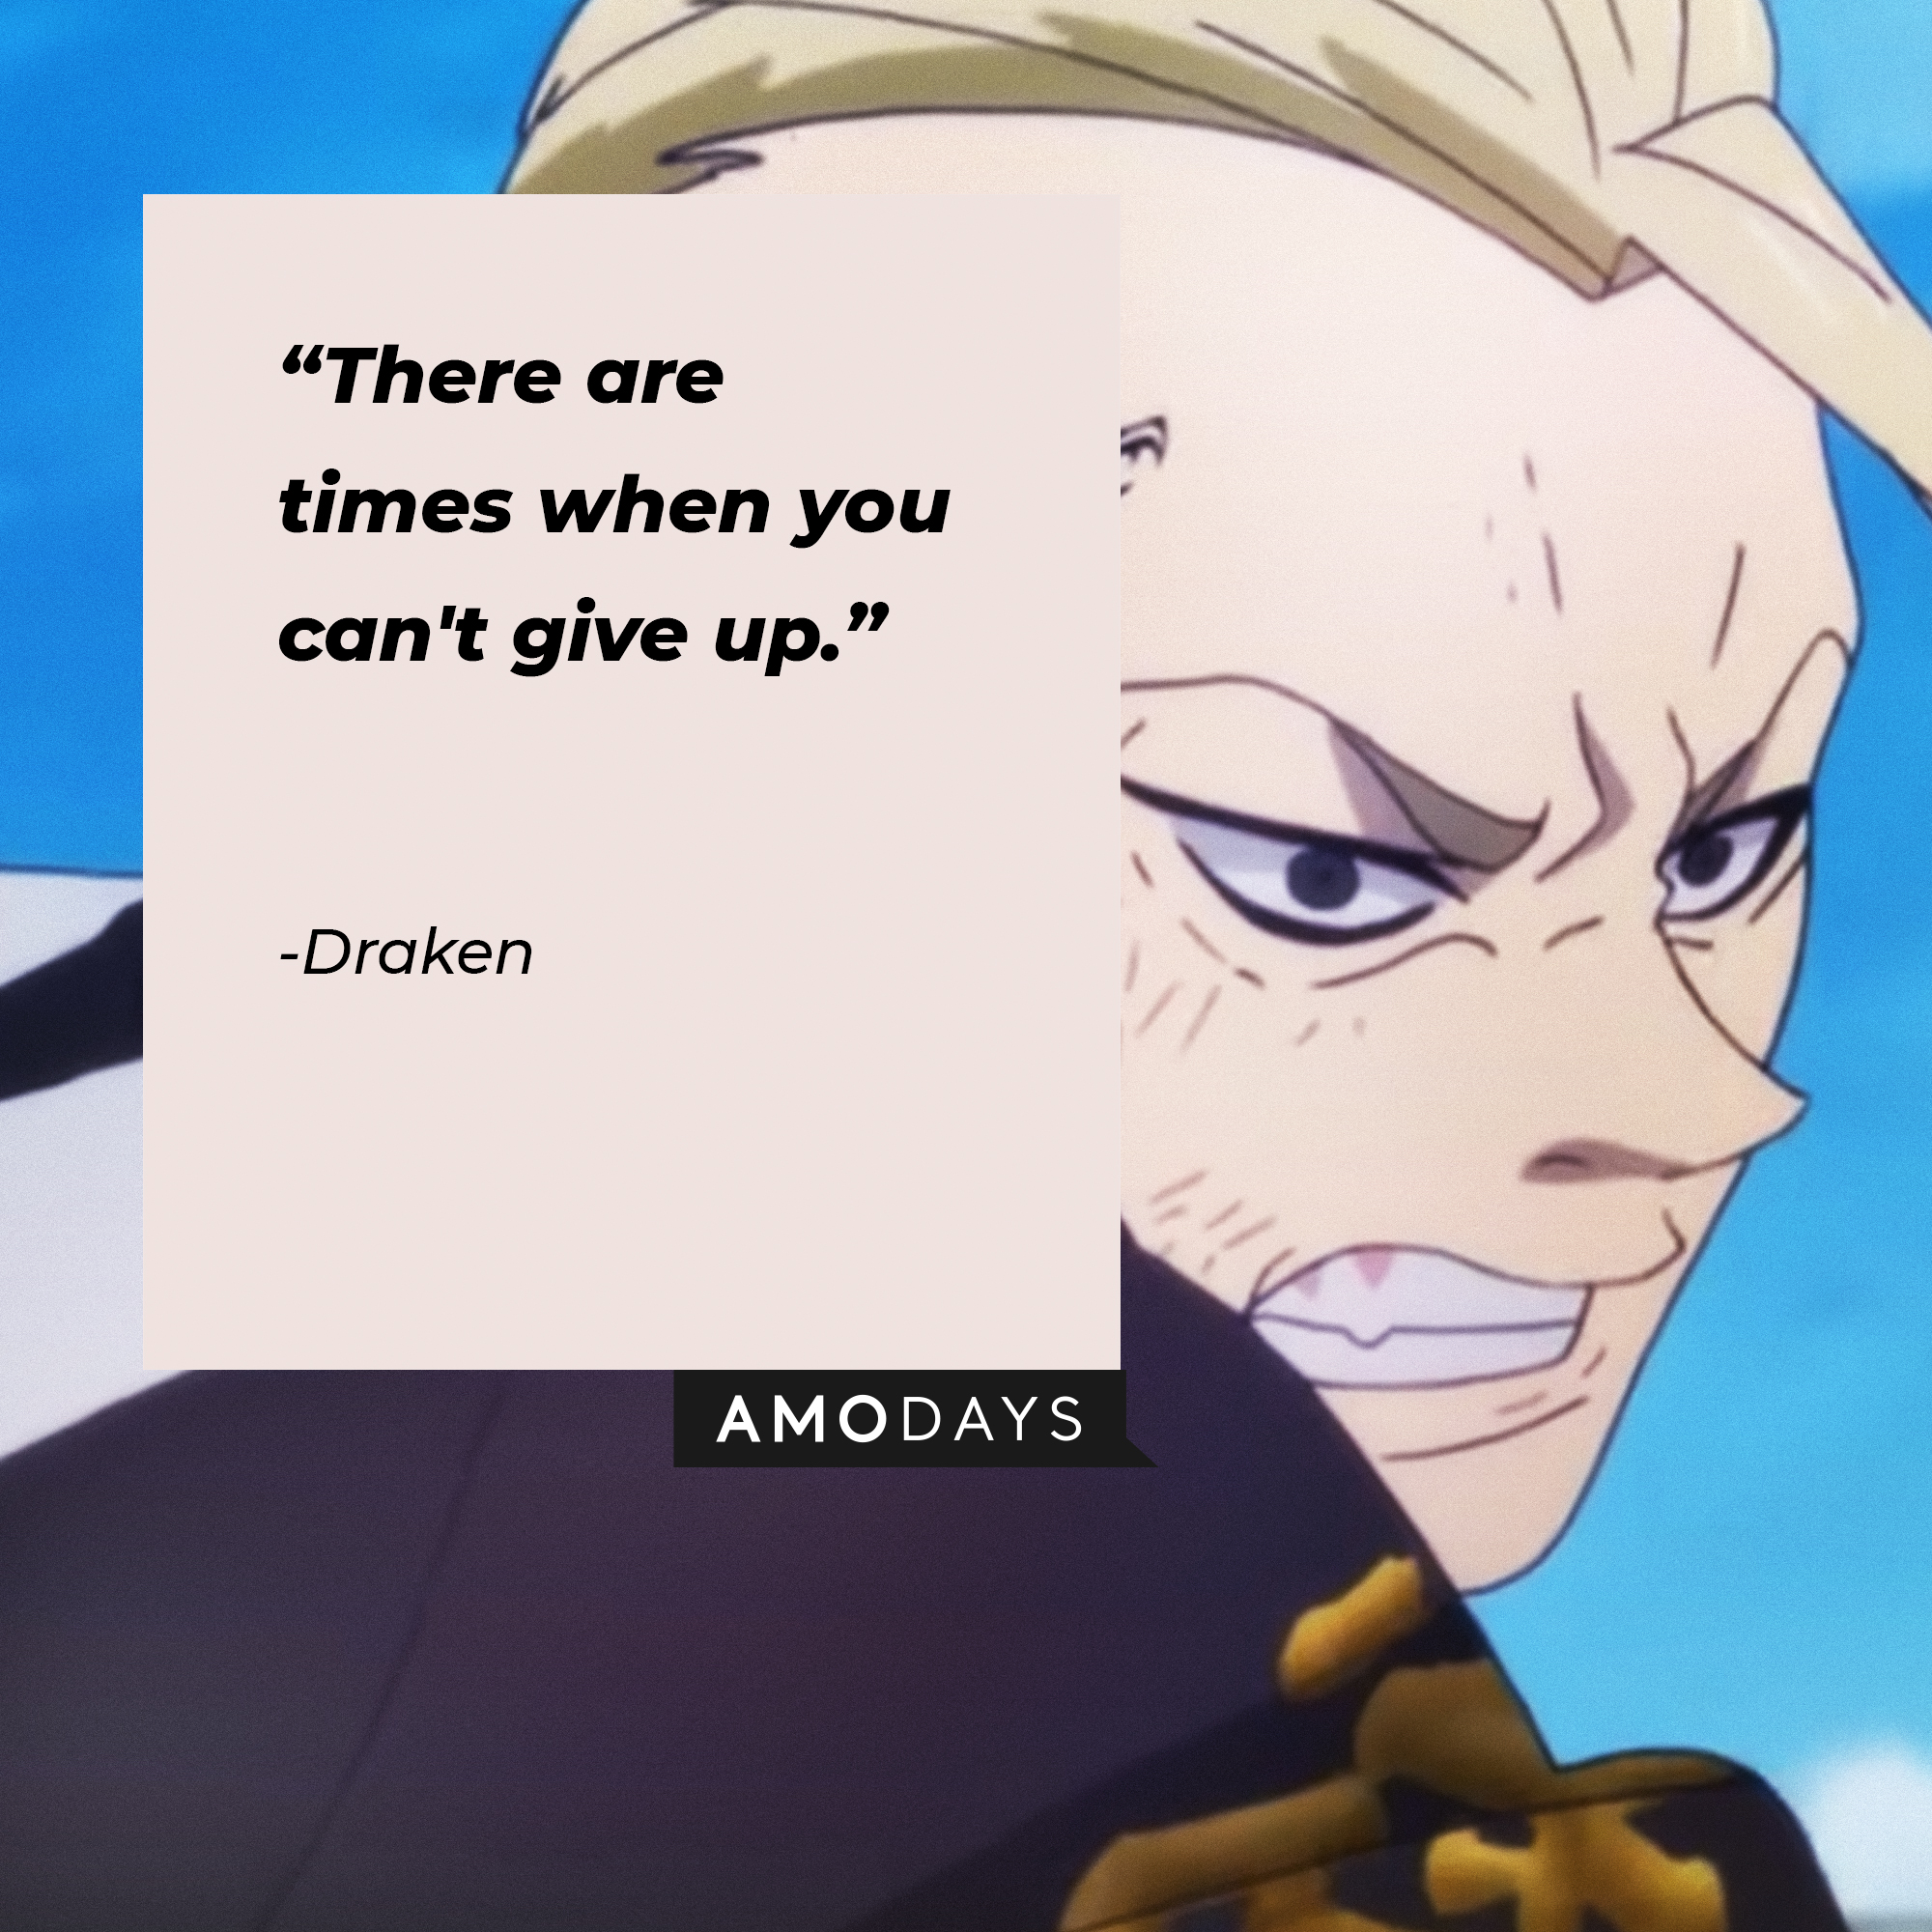 Draken's quote: "There are times when you can't give up." | Source: Youtube.com/Crunchyroll Collection